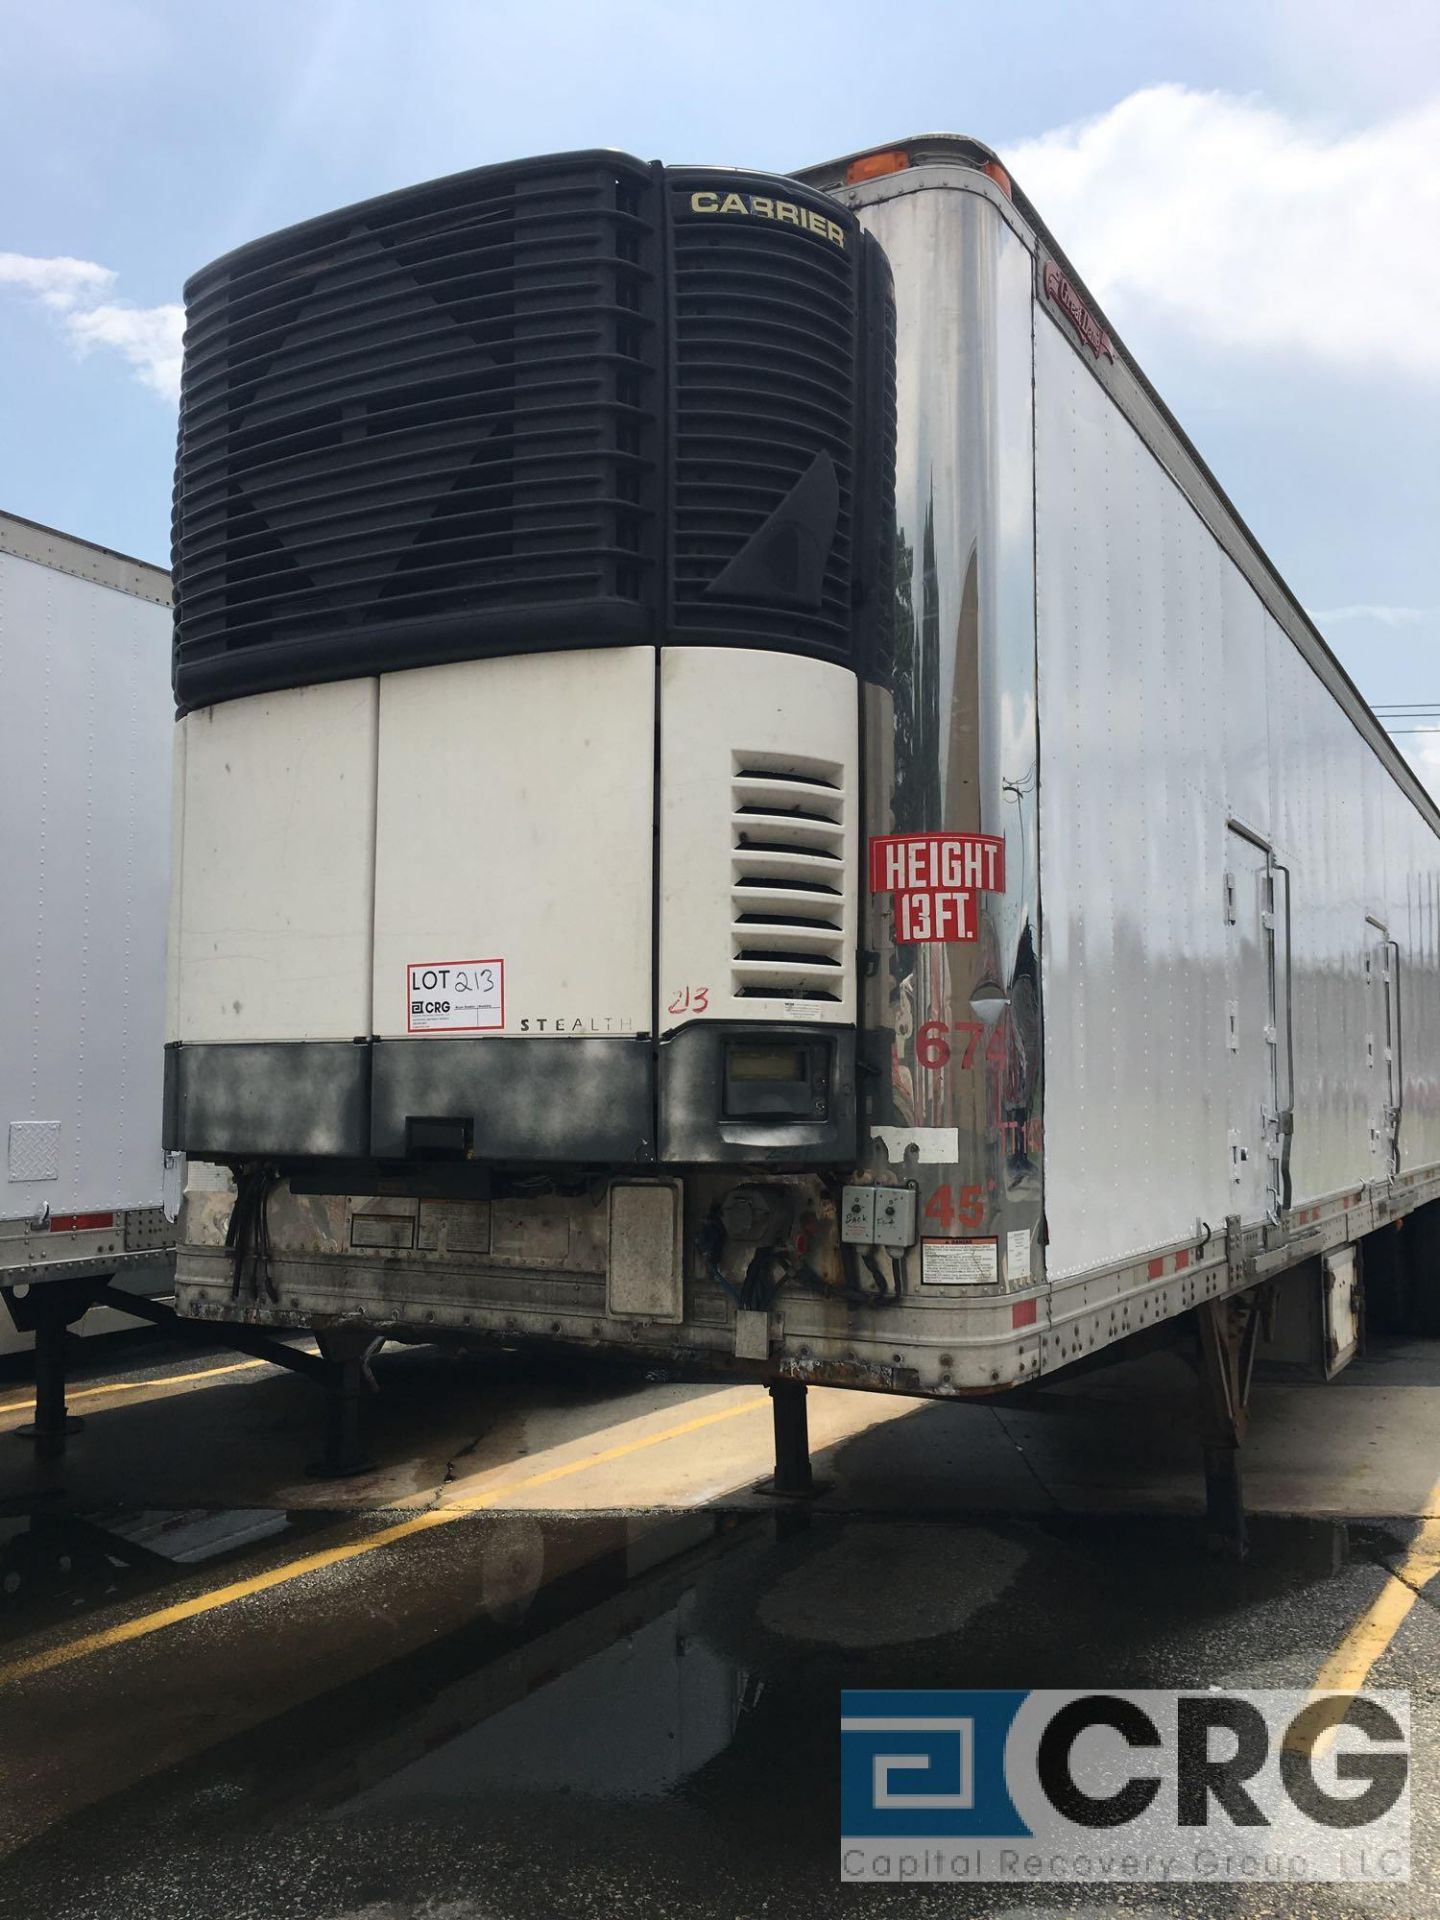 2004 Great Dane Multi Temp Refrigerated Semi Trailer - 45 Long, 96" wide, Carrier Stealth, 17569